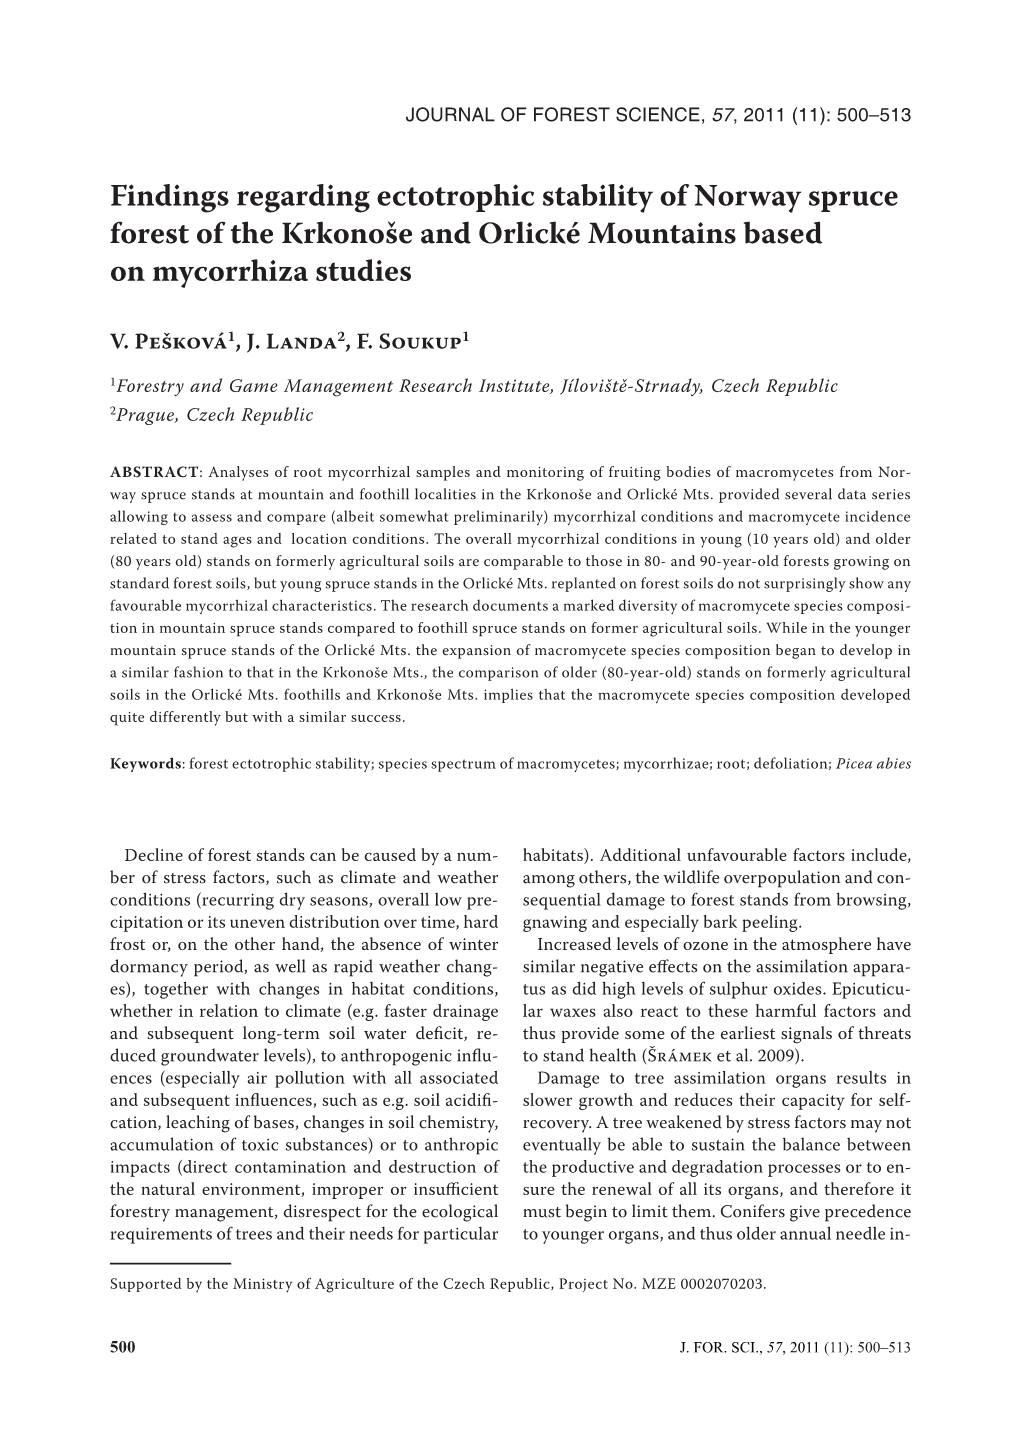 Findings Regarding Ectotrophic Stability of Norway Spruce Forest of the Krkonoše and Orlické Mountains Based on Mycorrhiza Studies